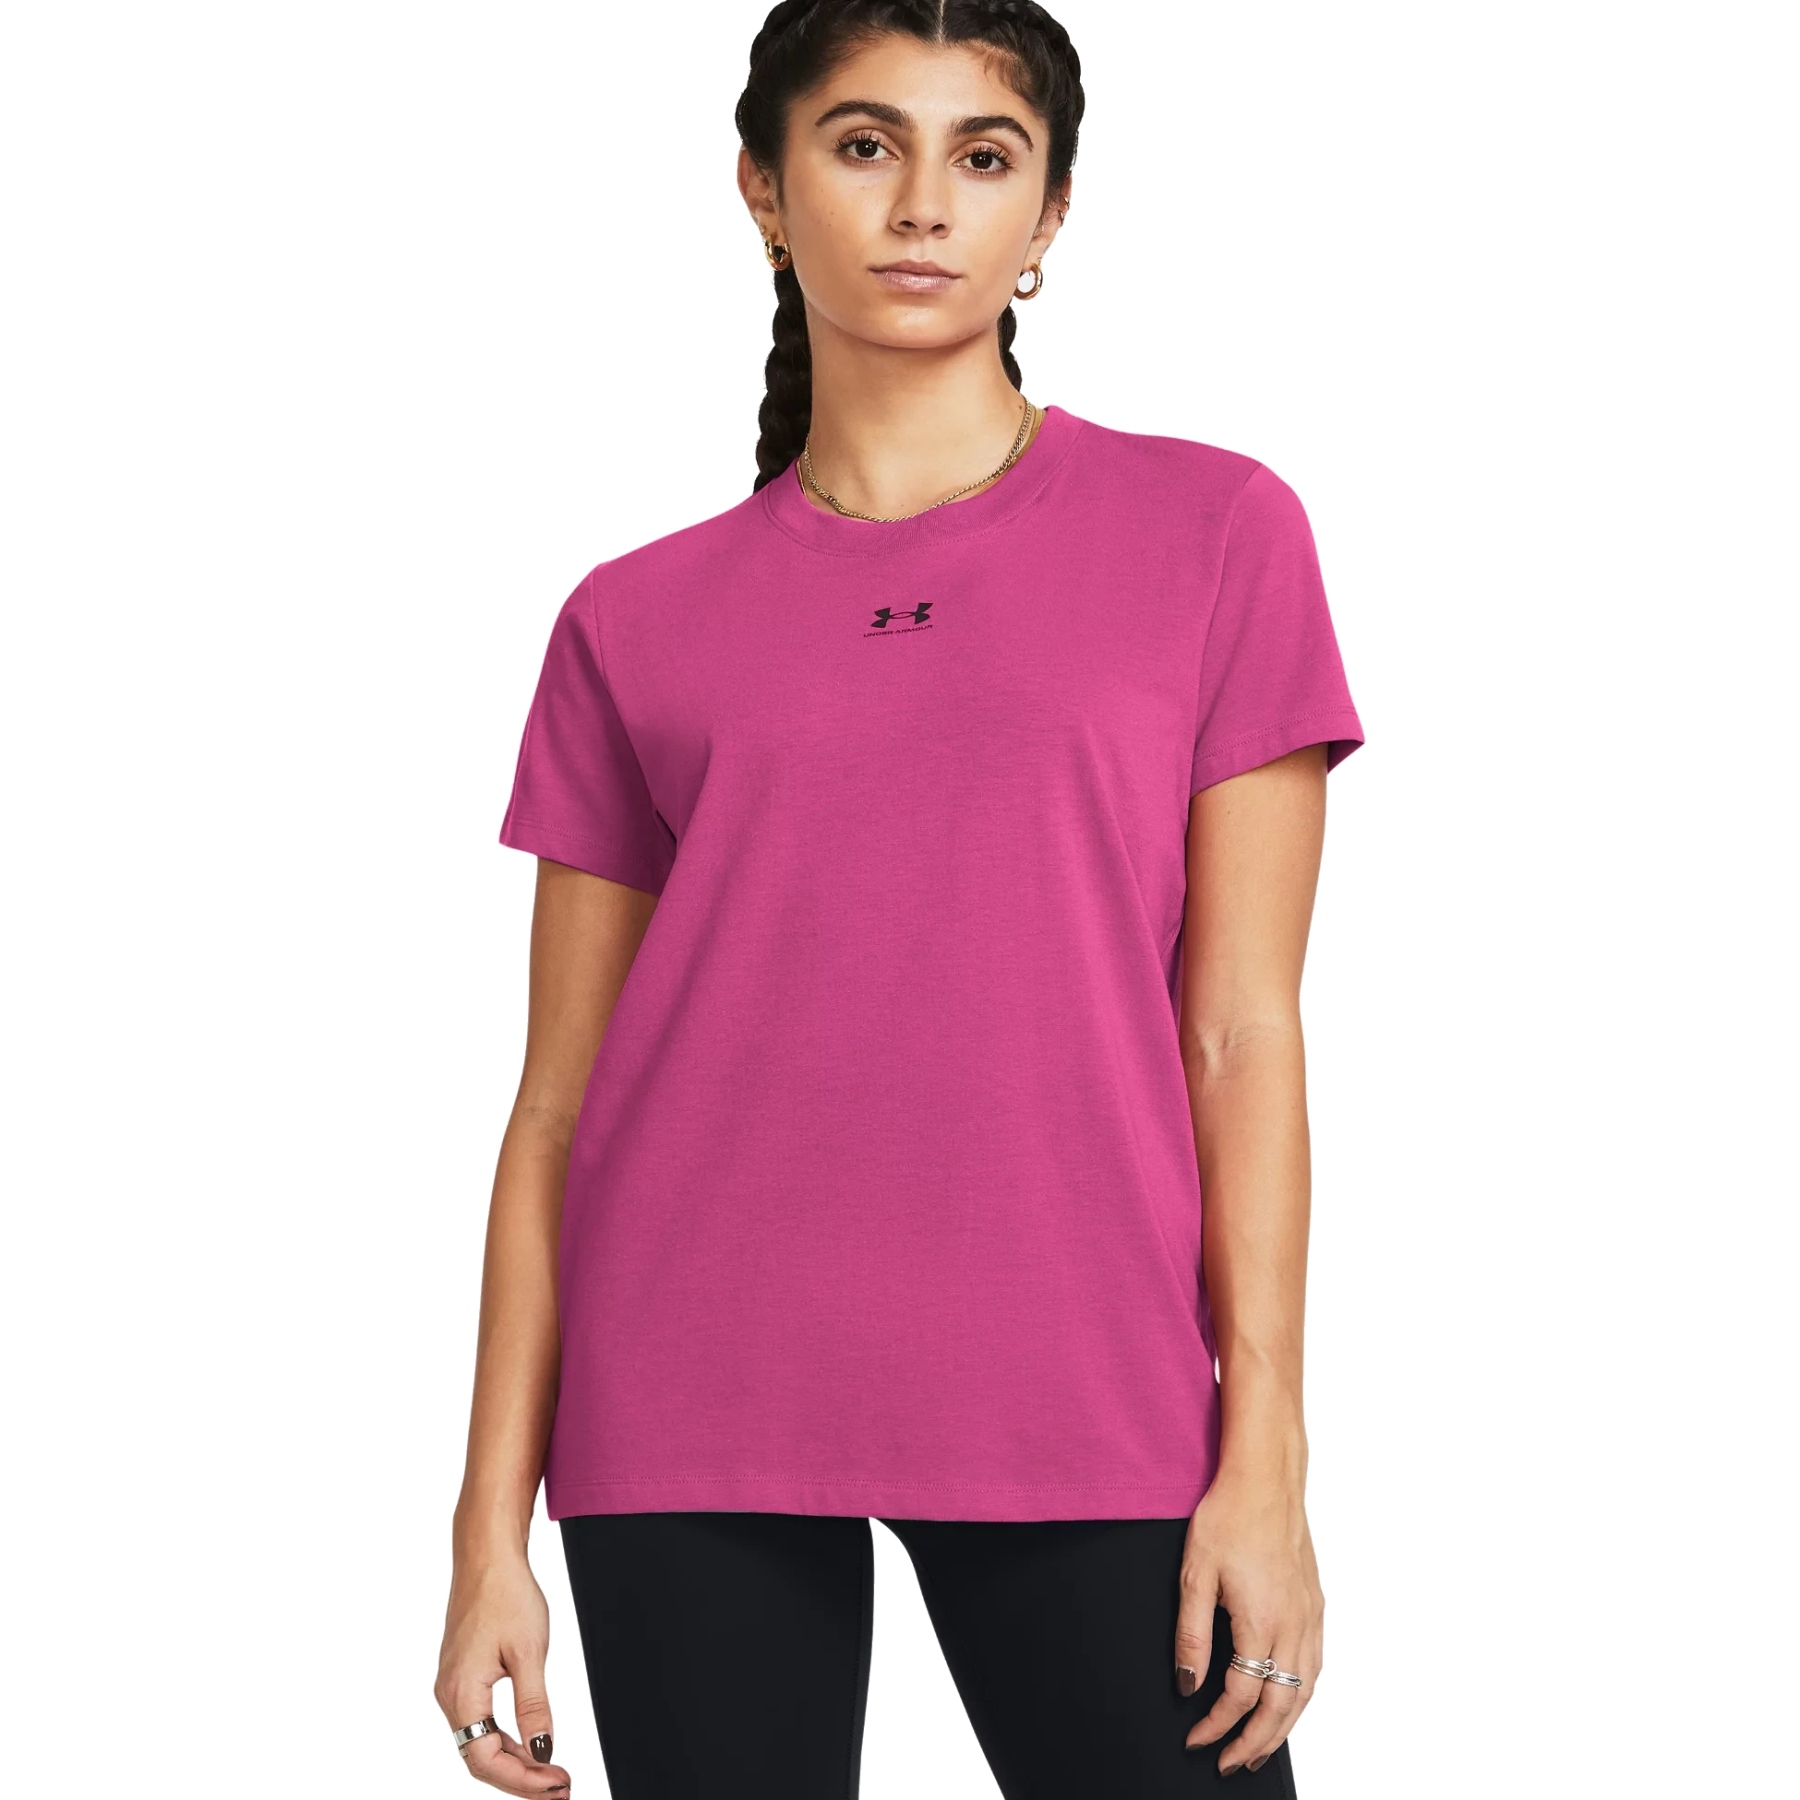 Picture of Under Armour UA Off Campus Core Short Sleeve Shirt Women - Astro Pink/Black